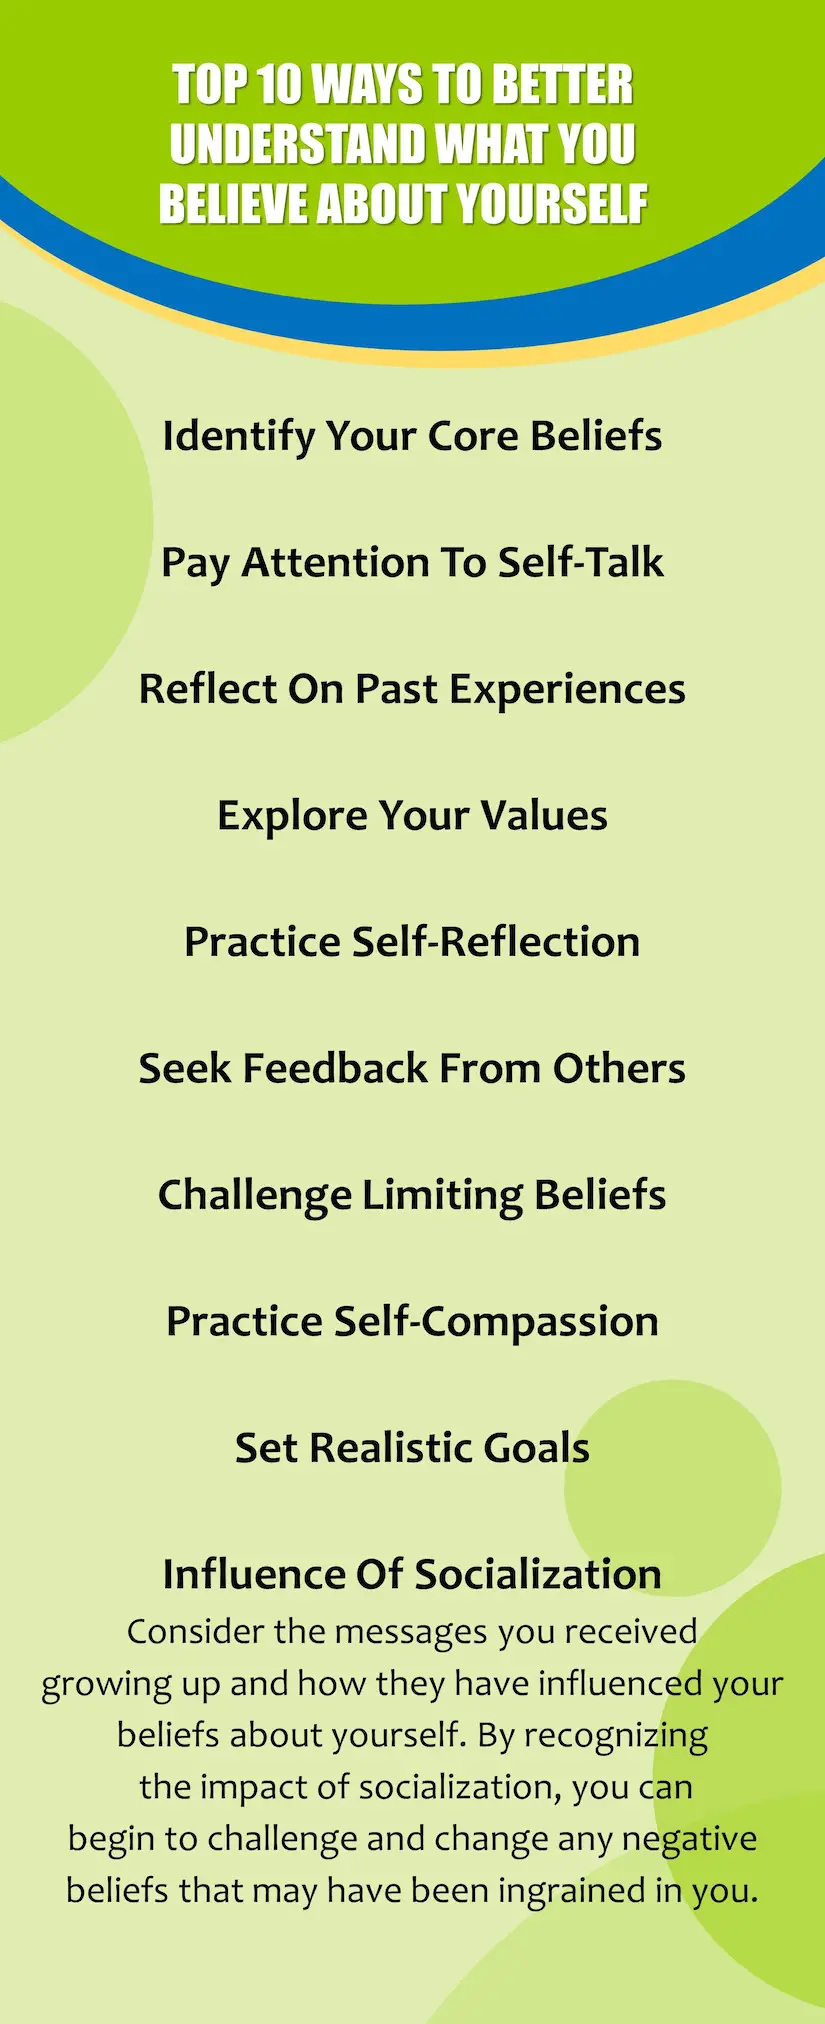 Top 10 Ways To Better Understand What You Believe About Yourself.